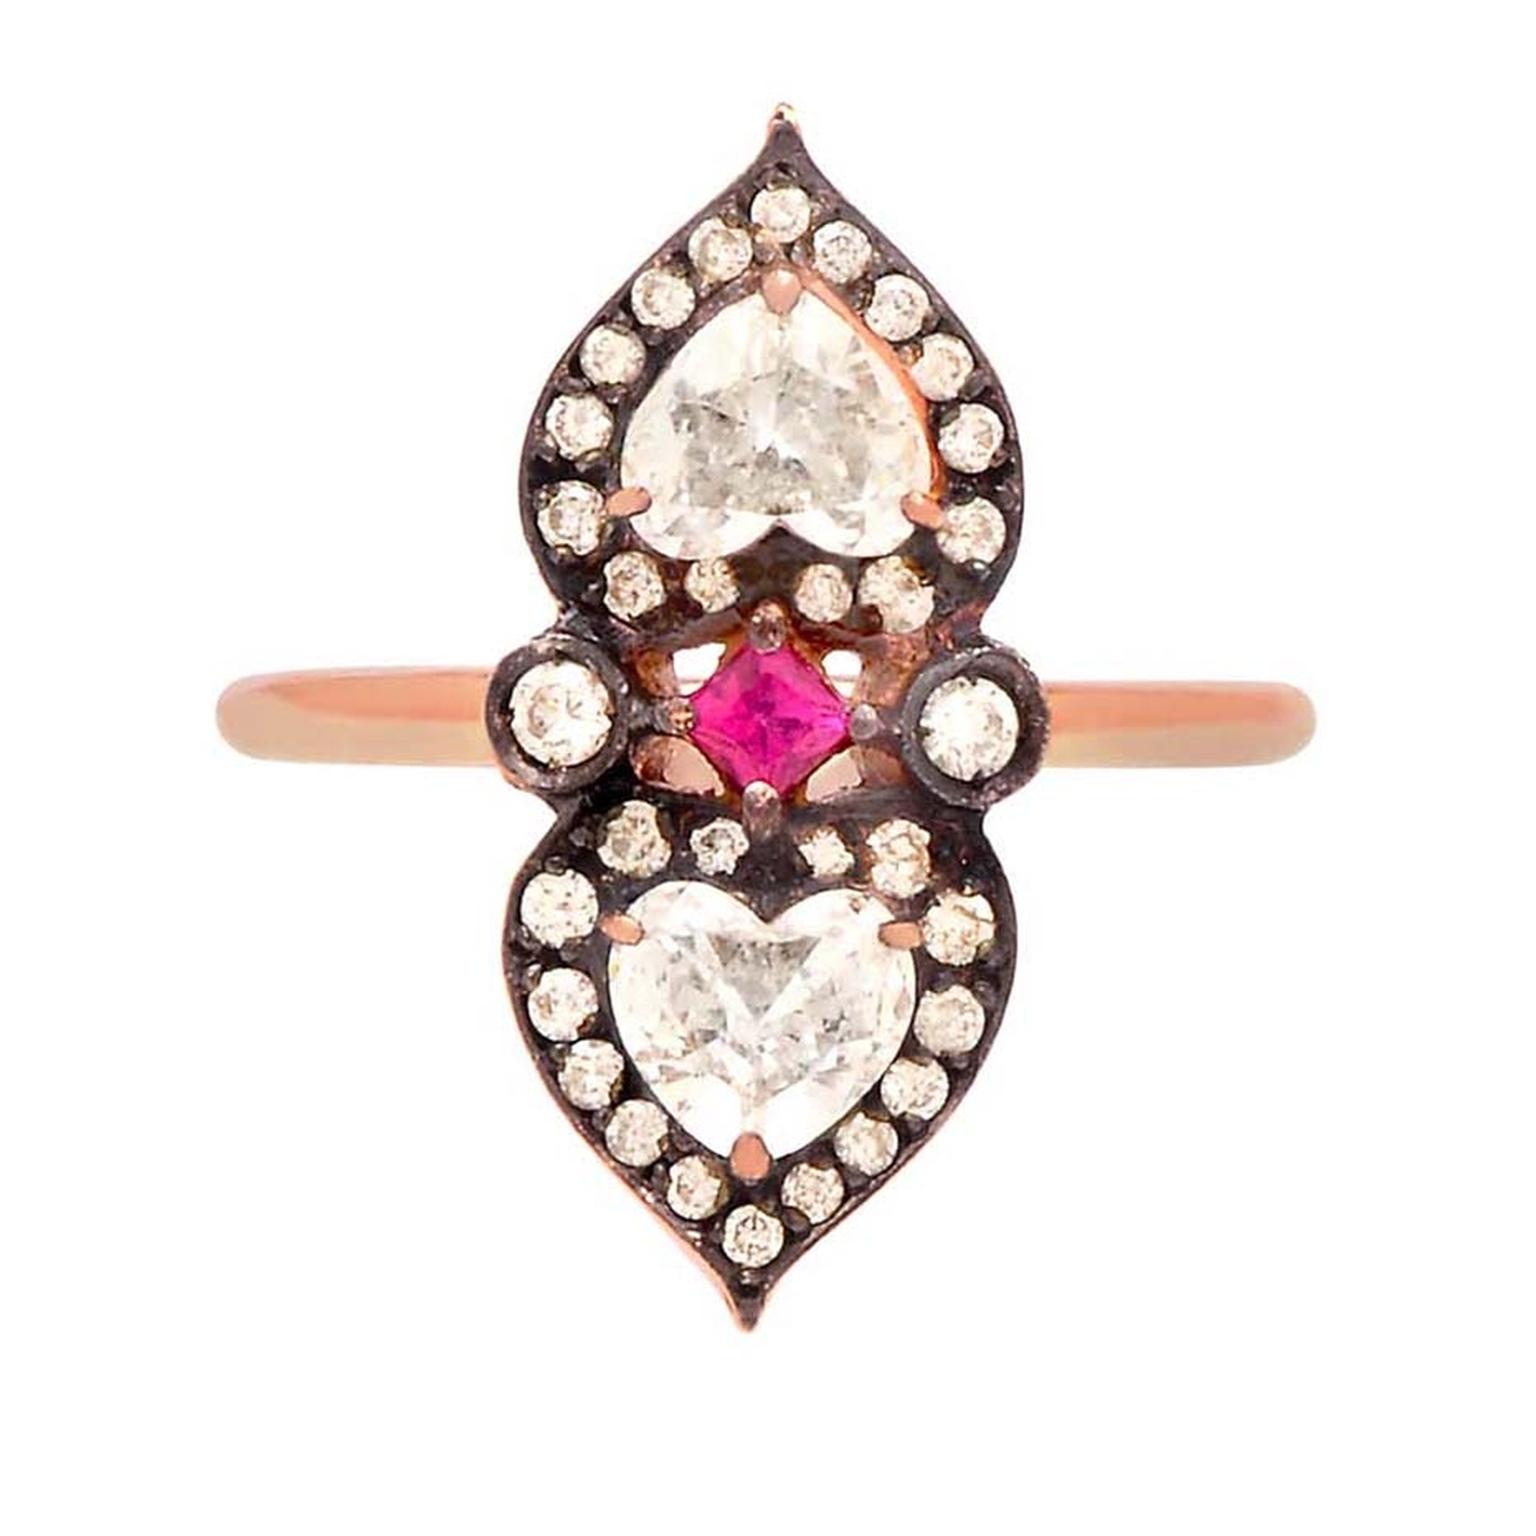 Sabine G's unusual heart-shaped diamond, ruby and rose gold ring from the Relic collection. This handmade engagement ring features two heart-shaped white diamonds set in heart-shaped, diamond-set, rose gold.